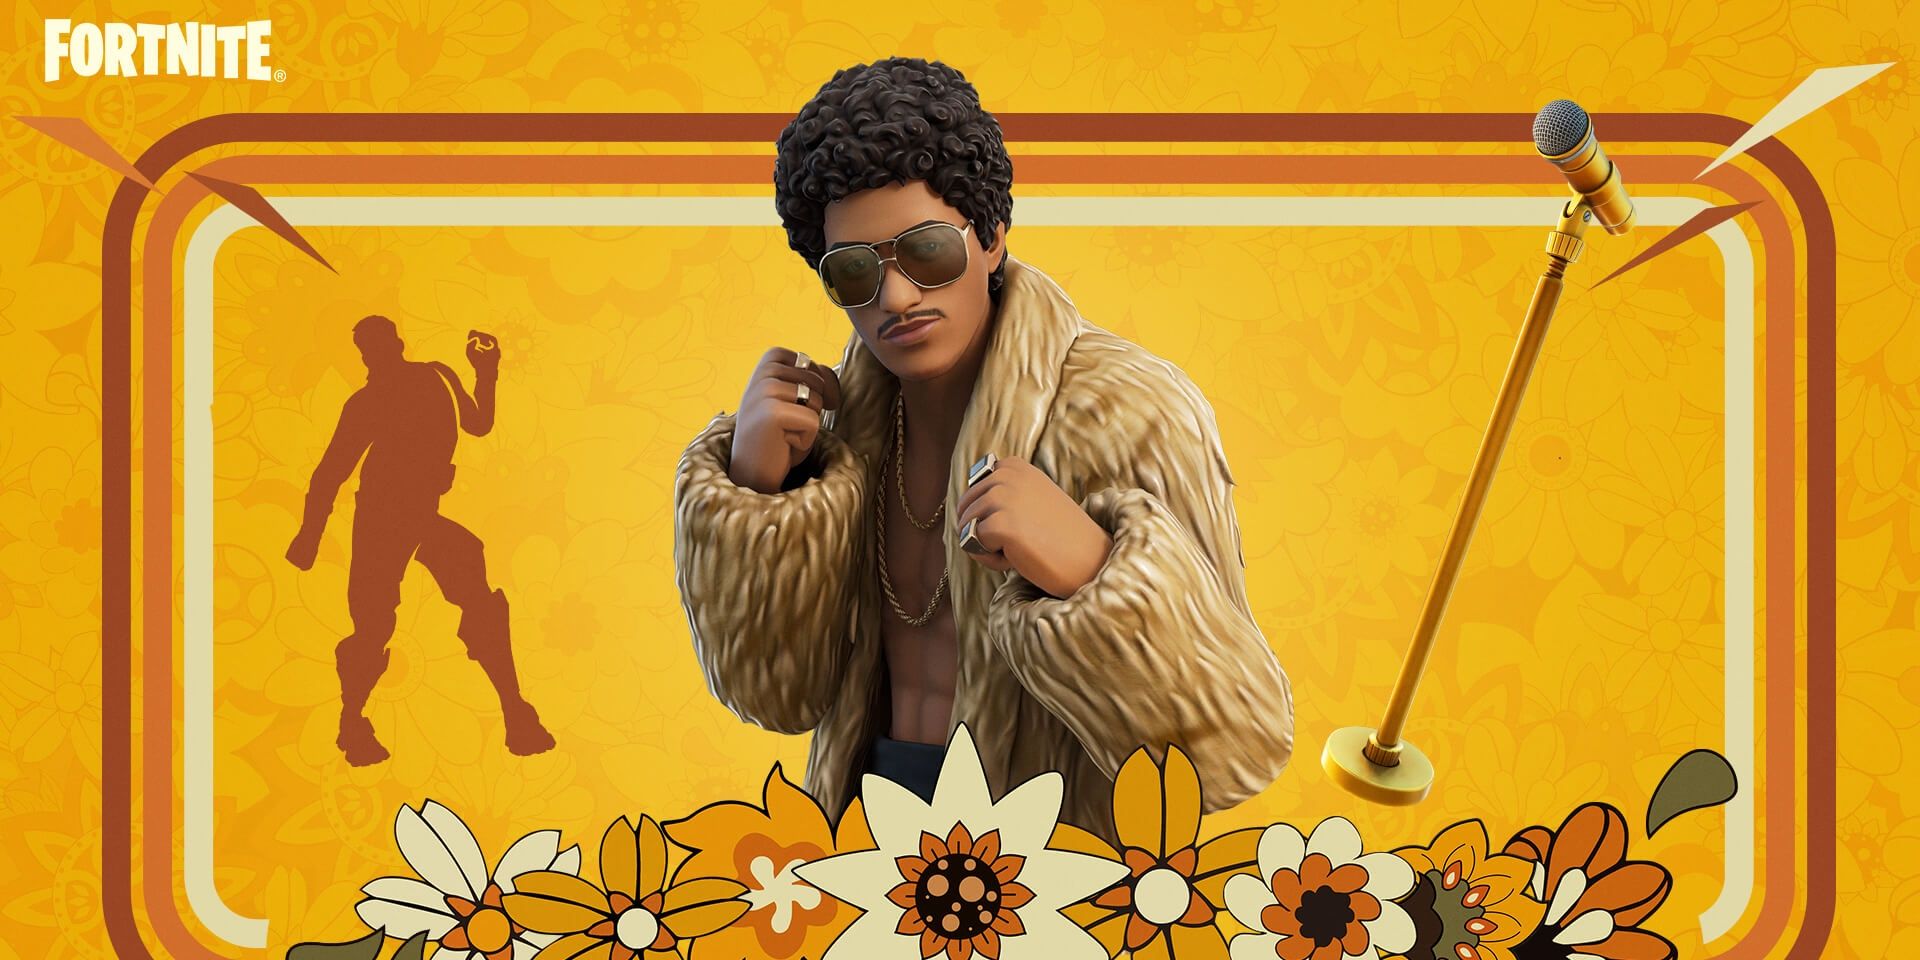 fortnite bruno mars outfit